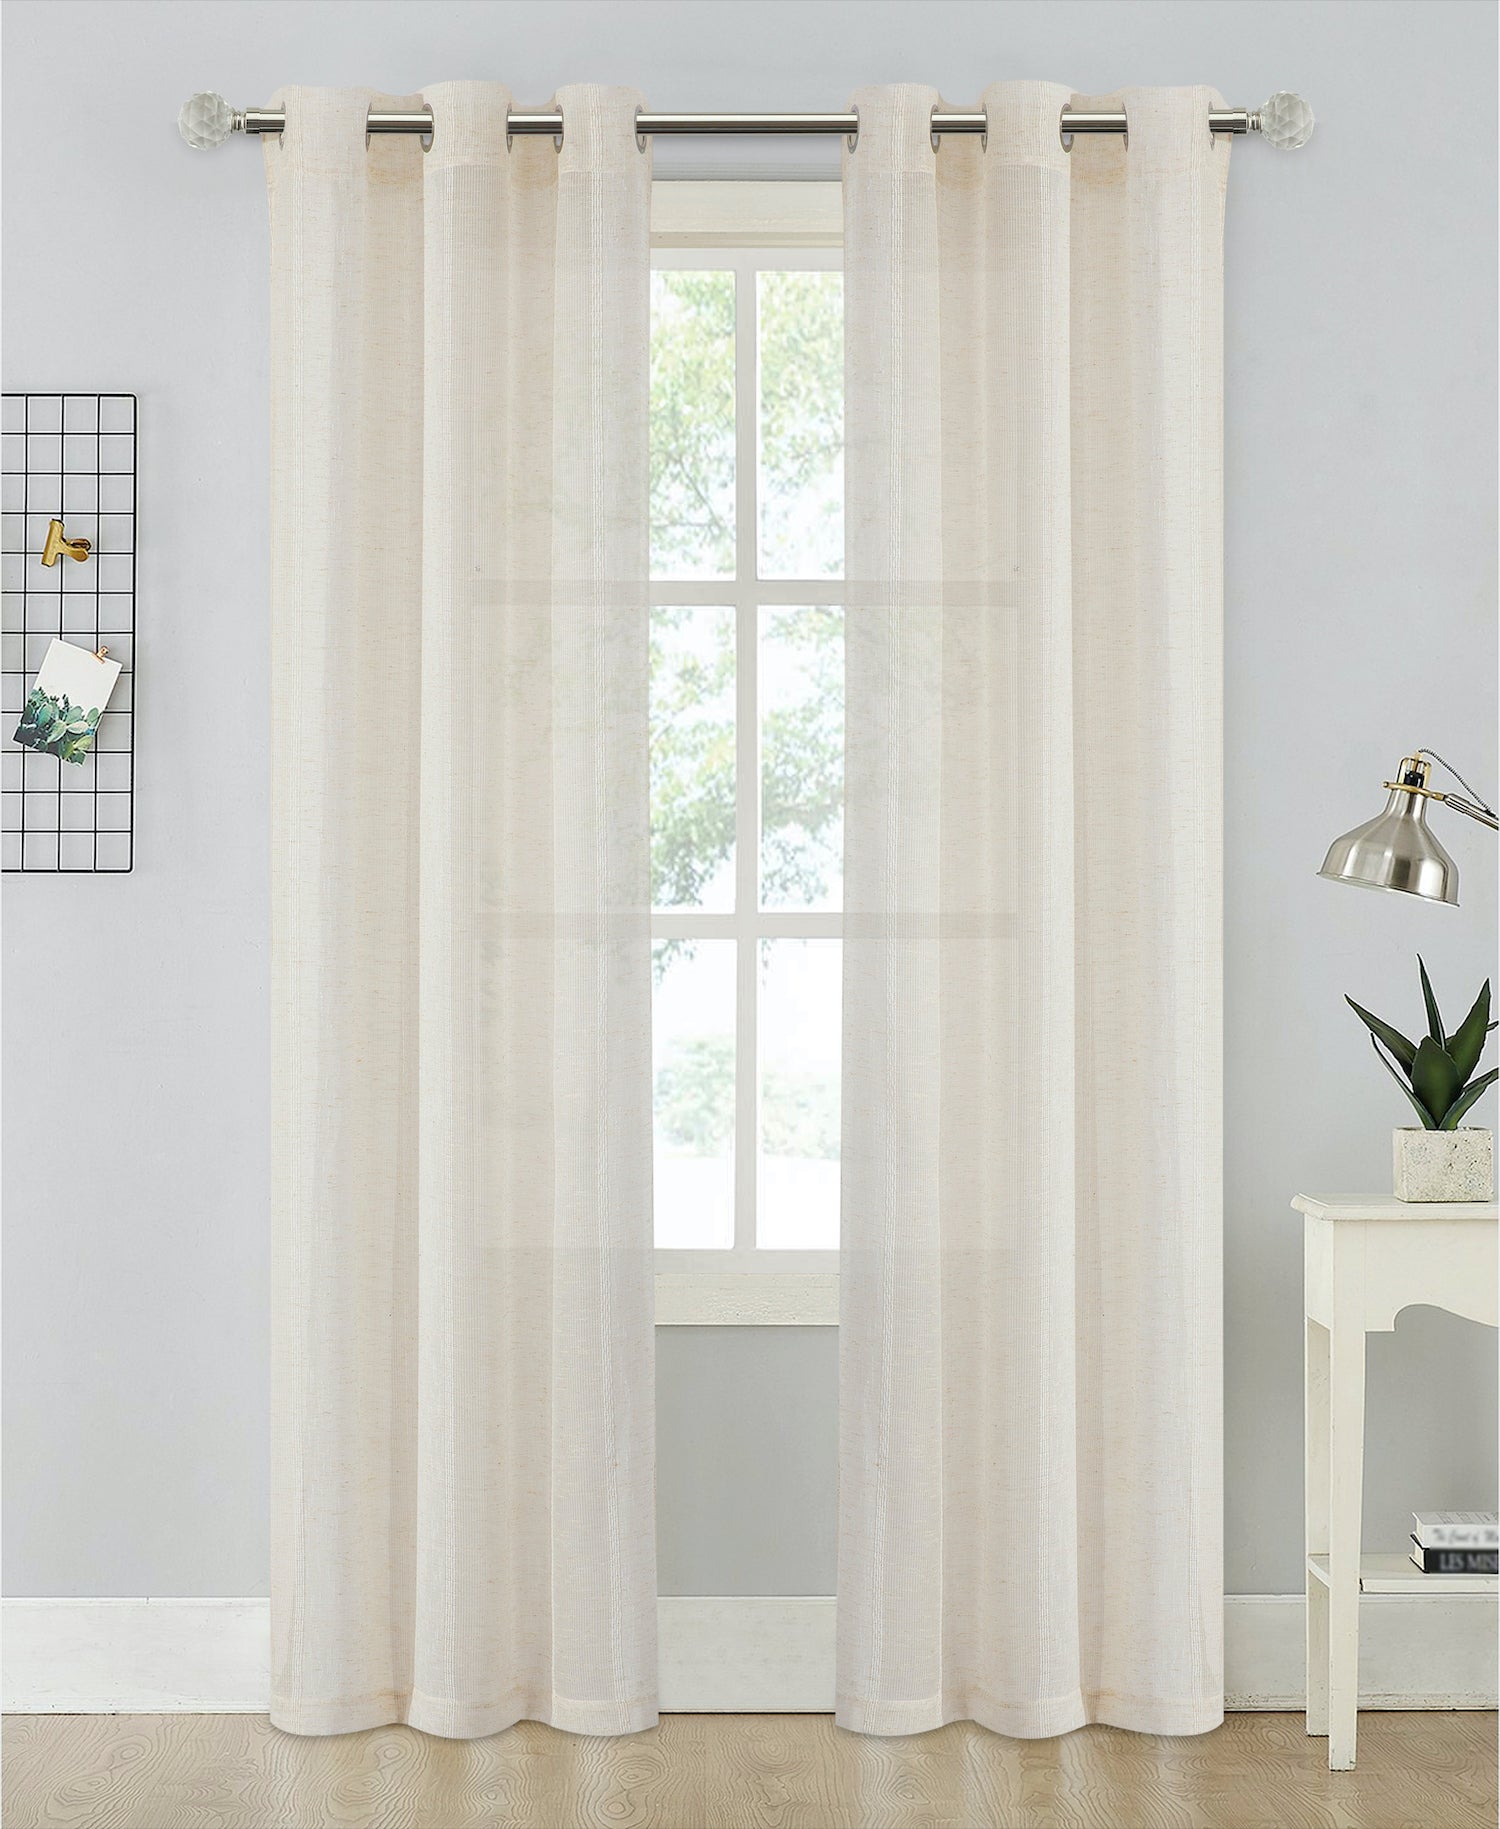 Dainty Home Megan Boho Chenille Embroidered Striped Linen Look Light Filtering Panel Pair